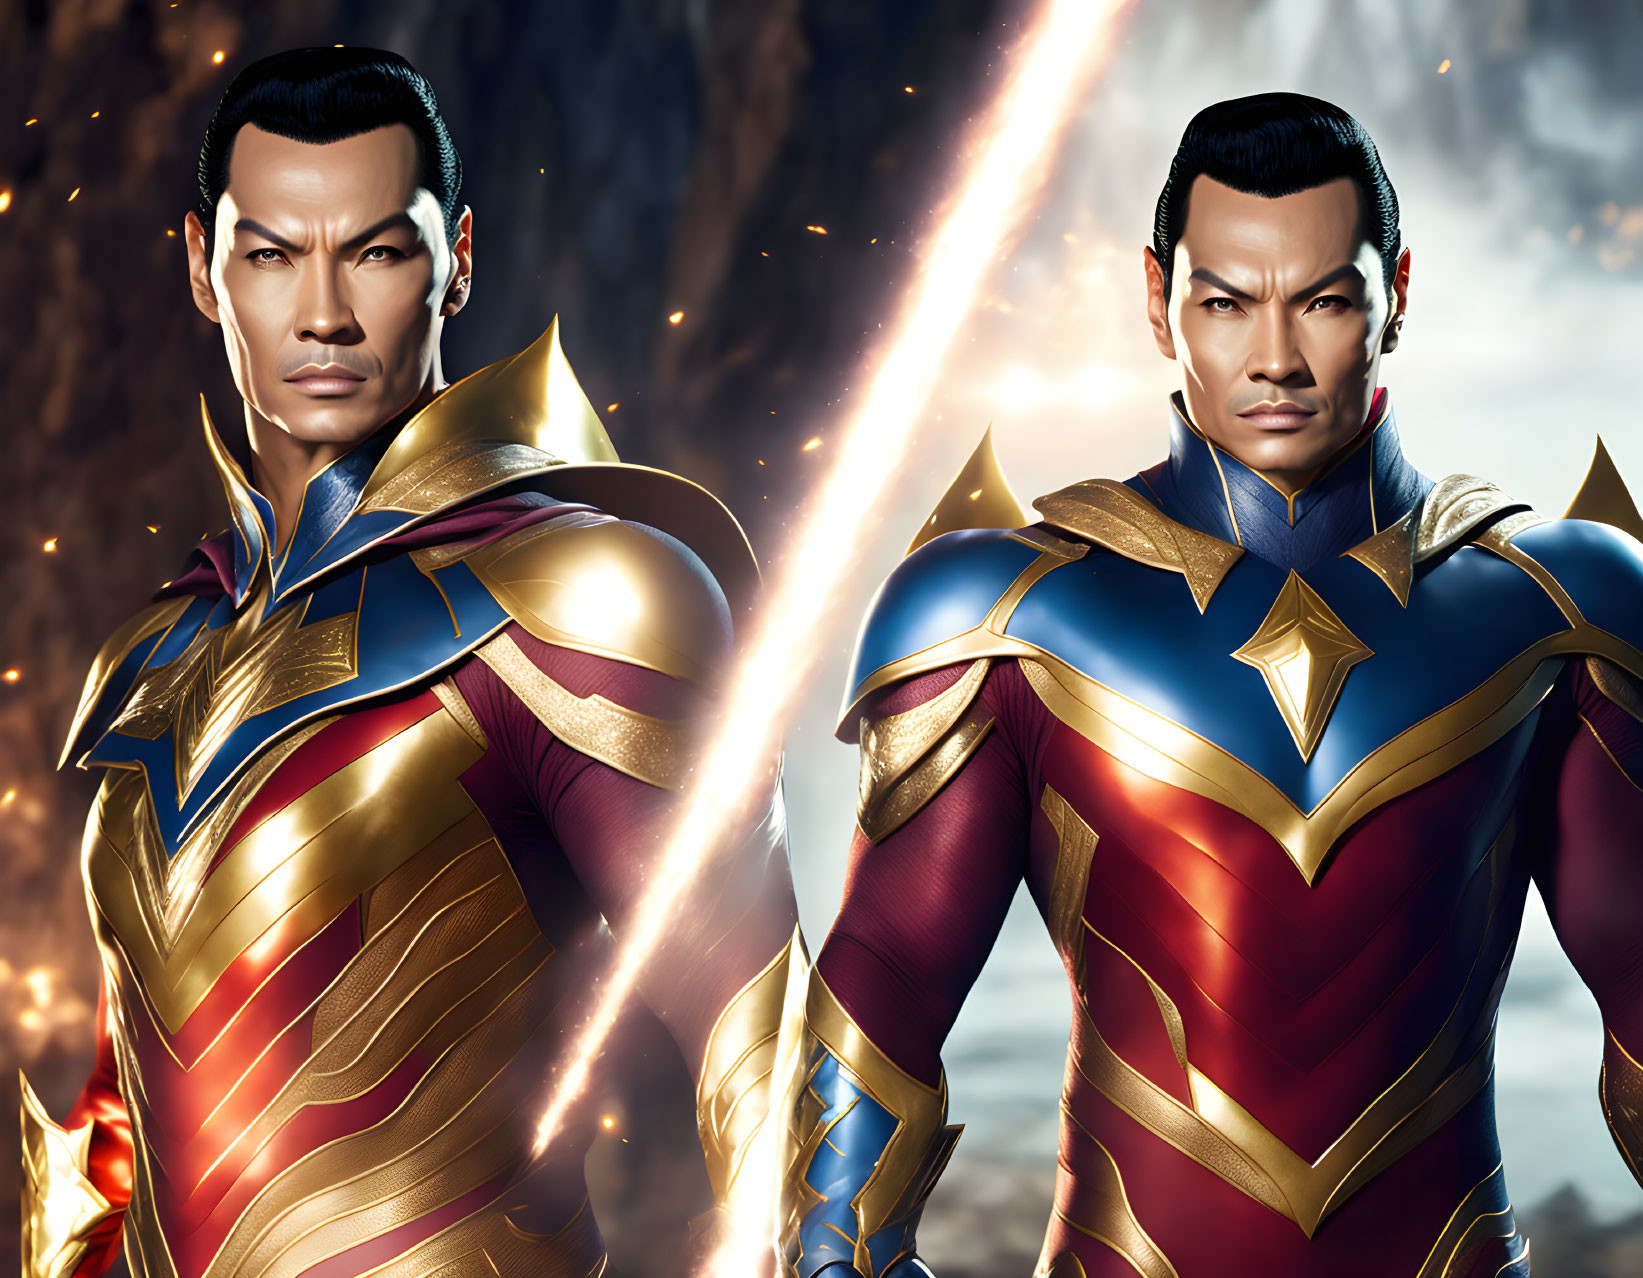 Stylized superhero characters in metallic costumes against explosive backdrop